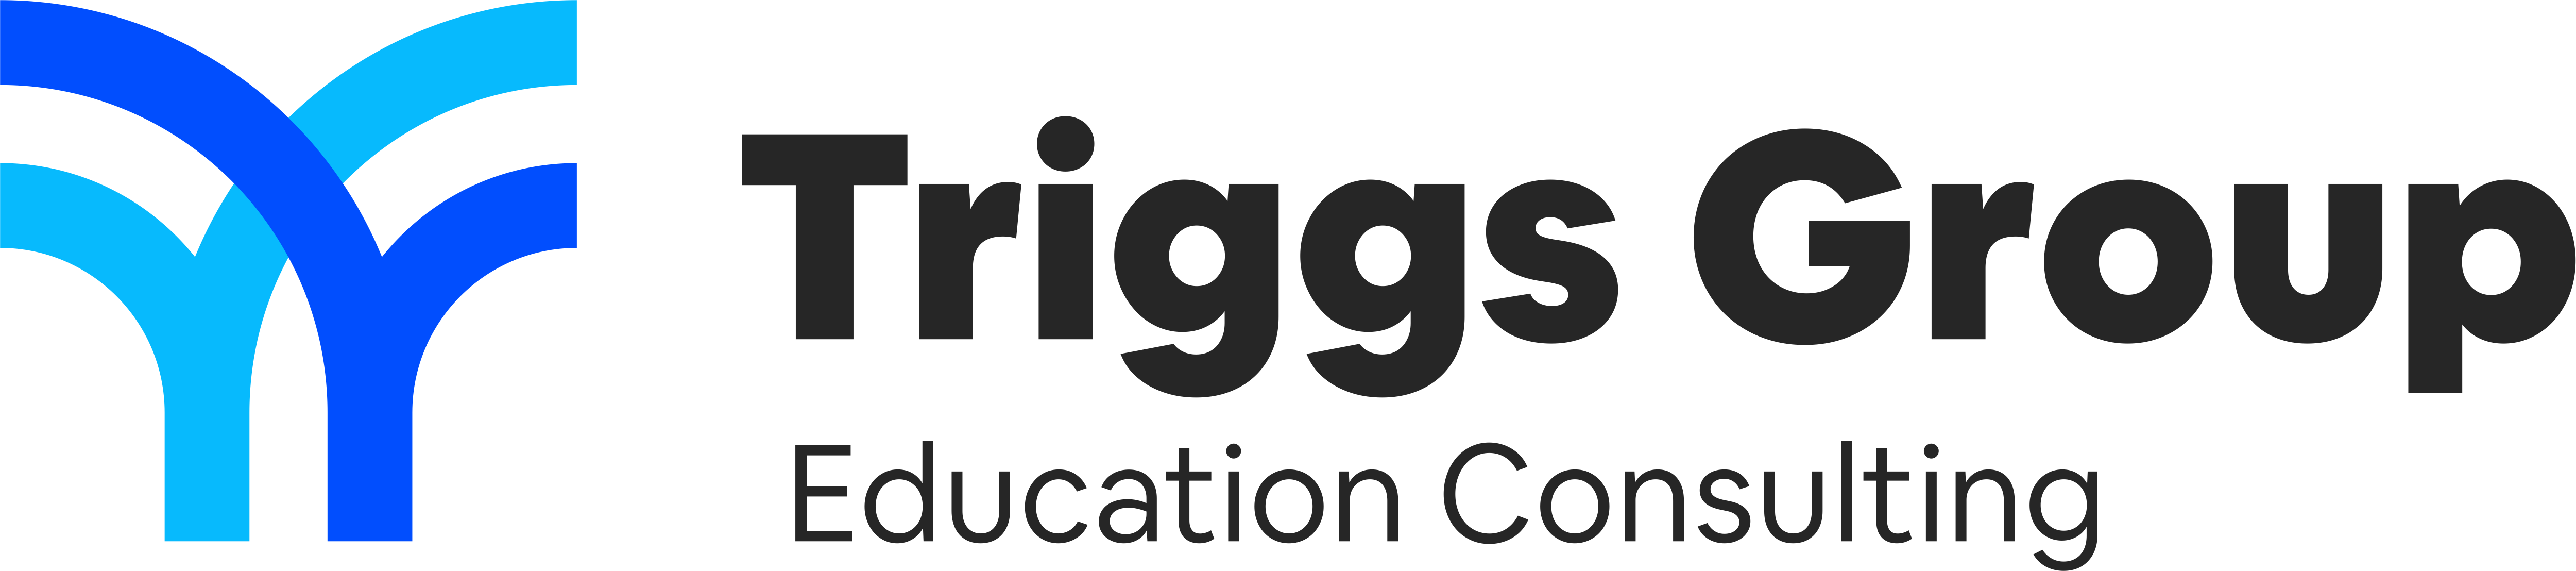 Triggs Group